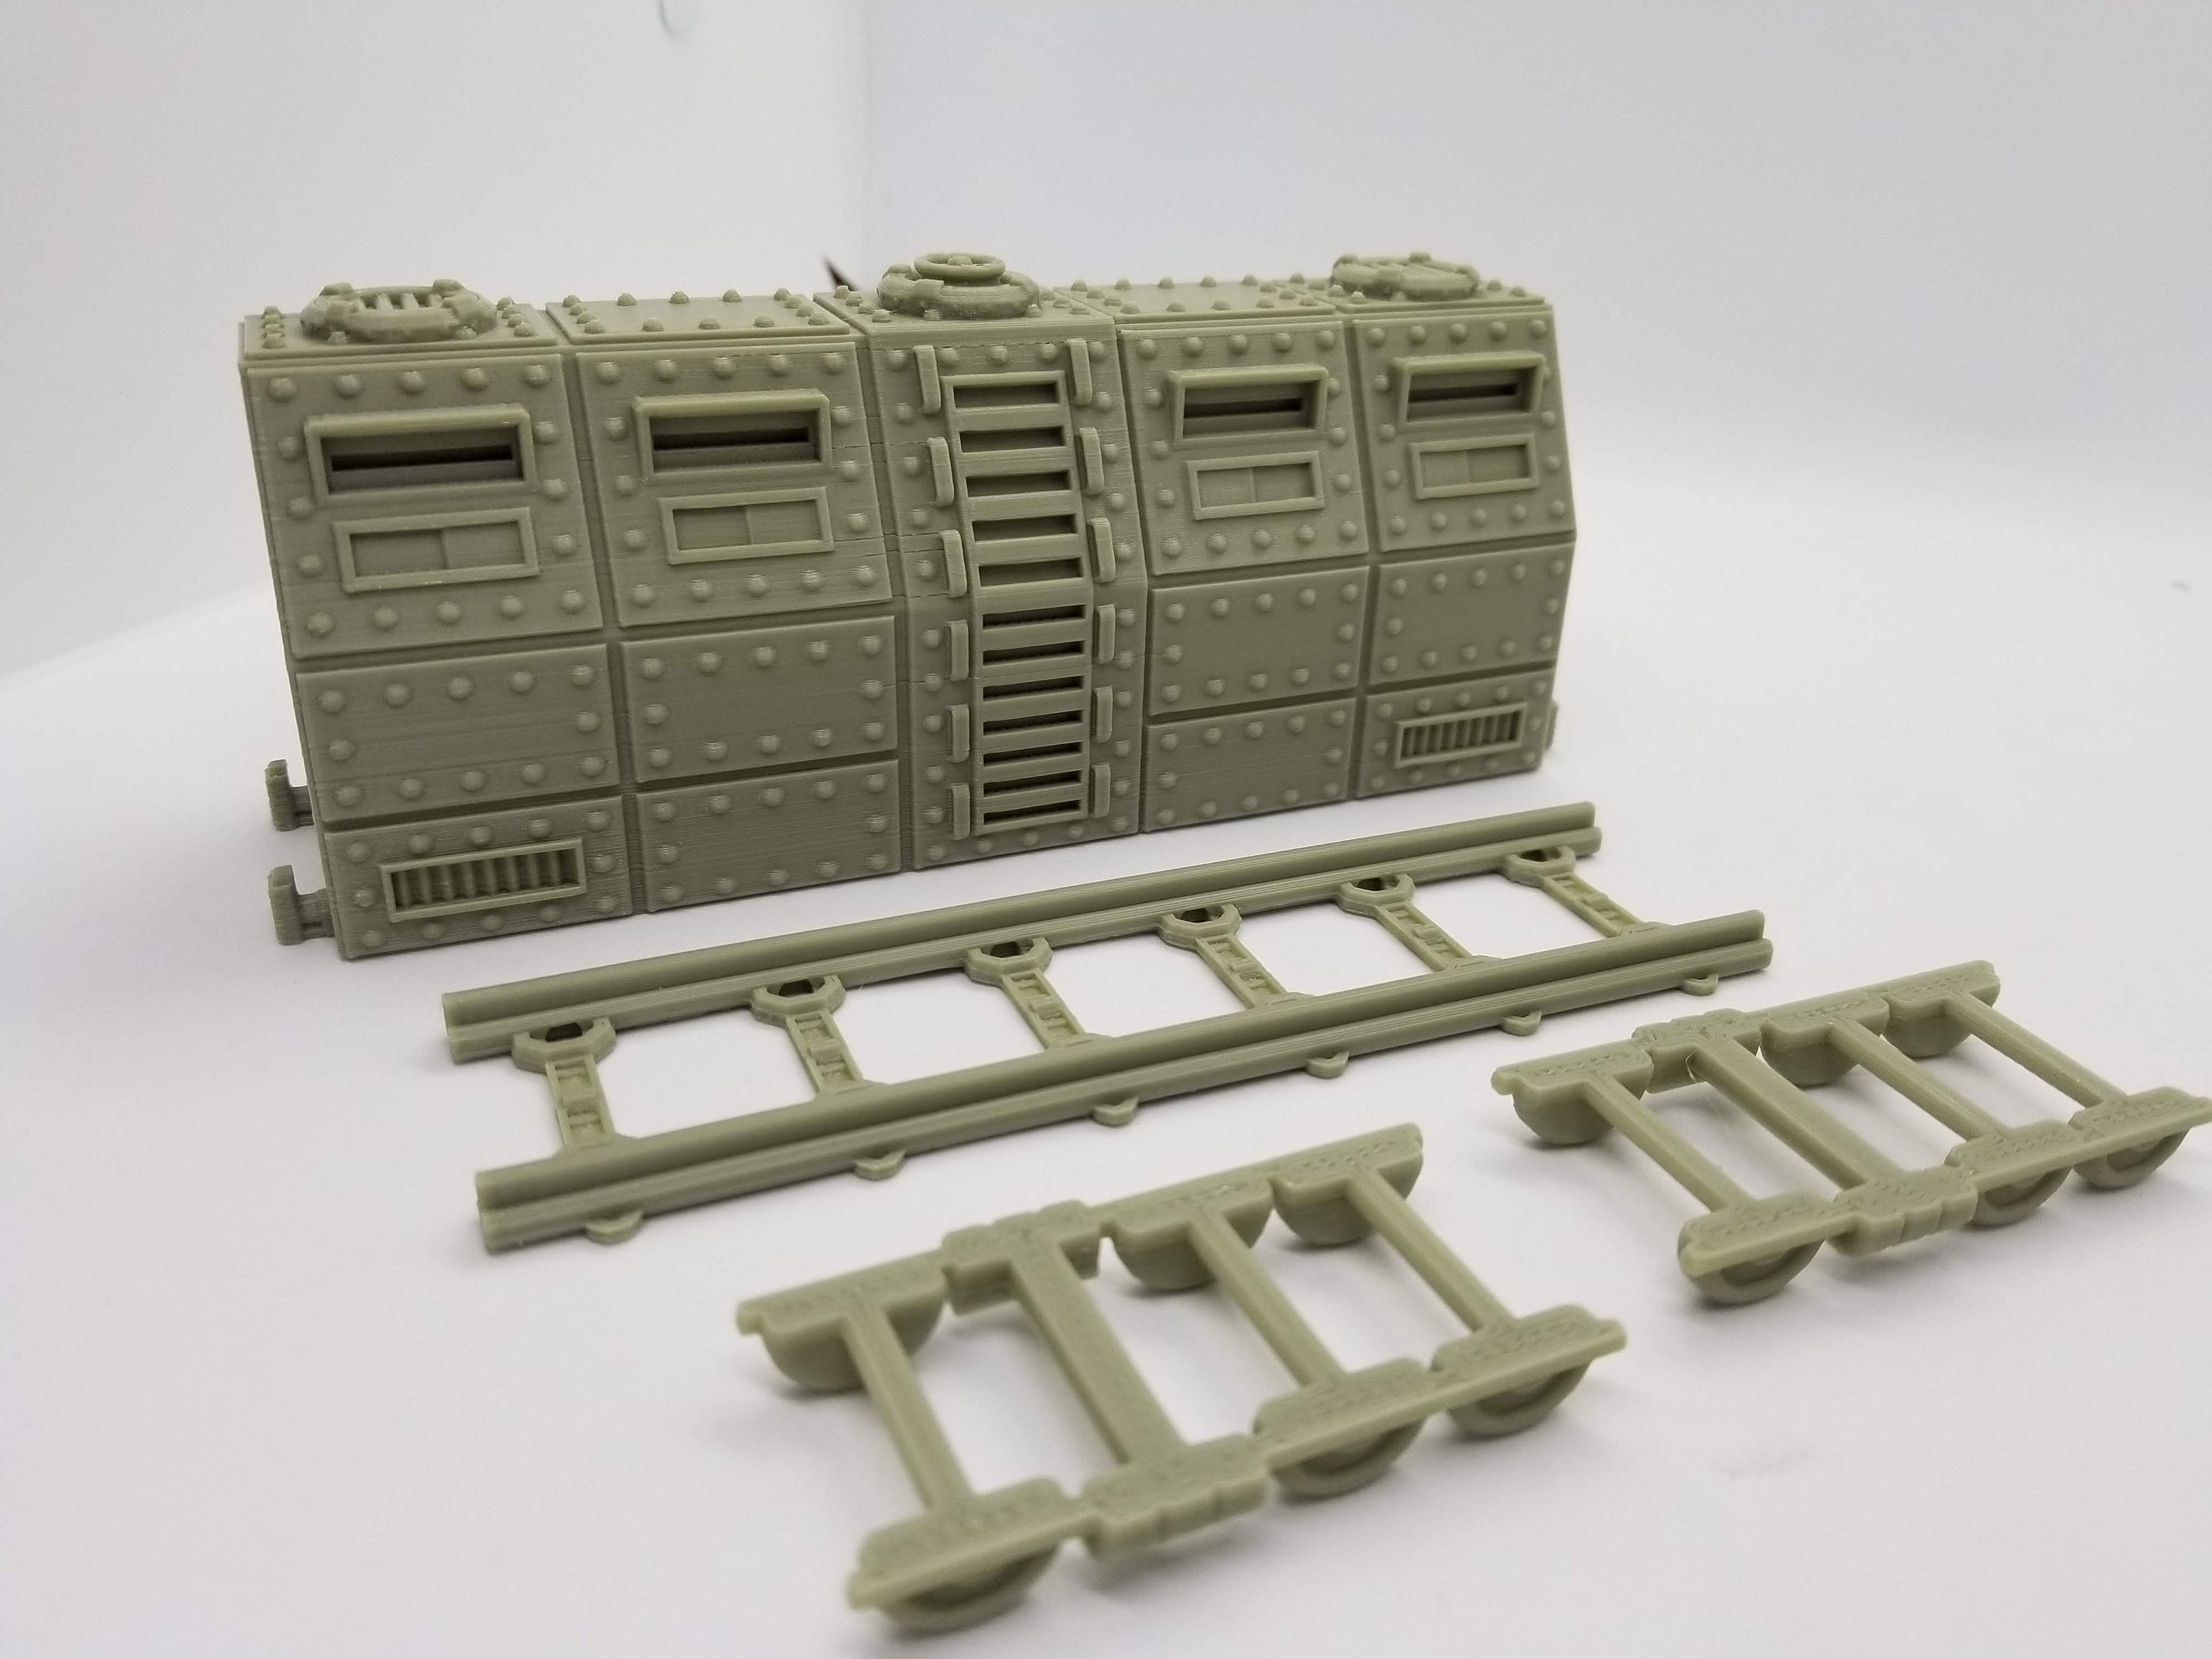 Sci-Fi Train Armored Car Add-On/ 28mm Wargaming Terrain / Warlayer /Print to Order / 3d Printed/Licensed Printer